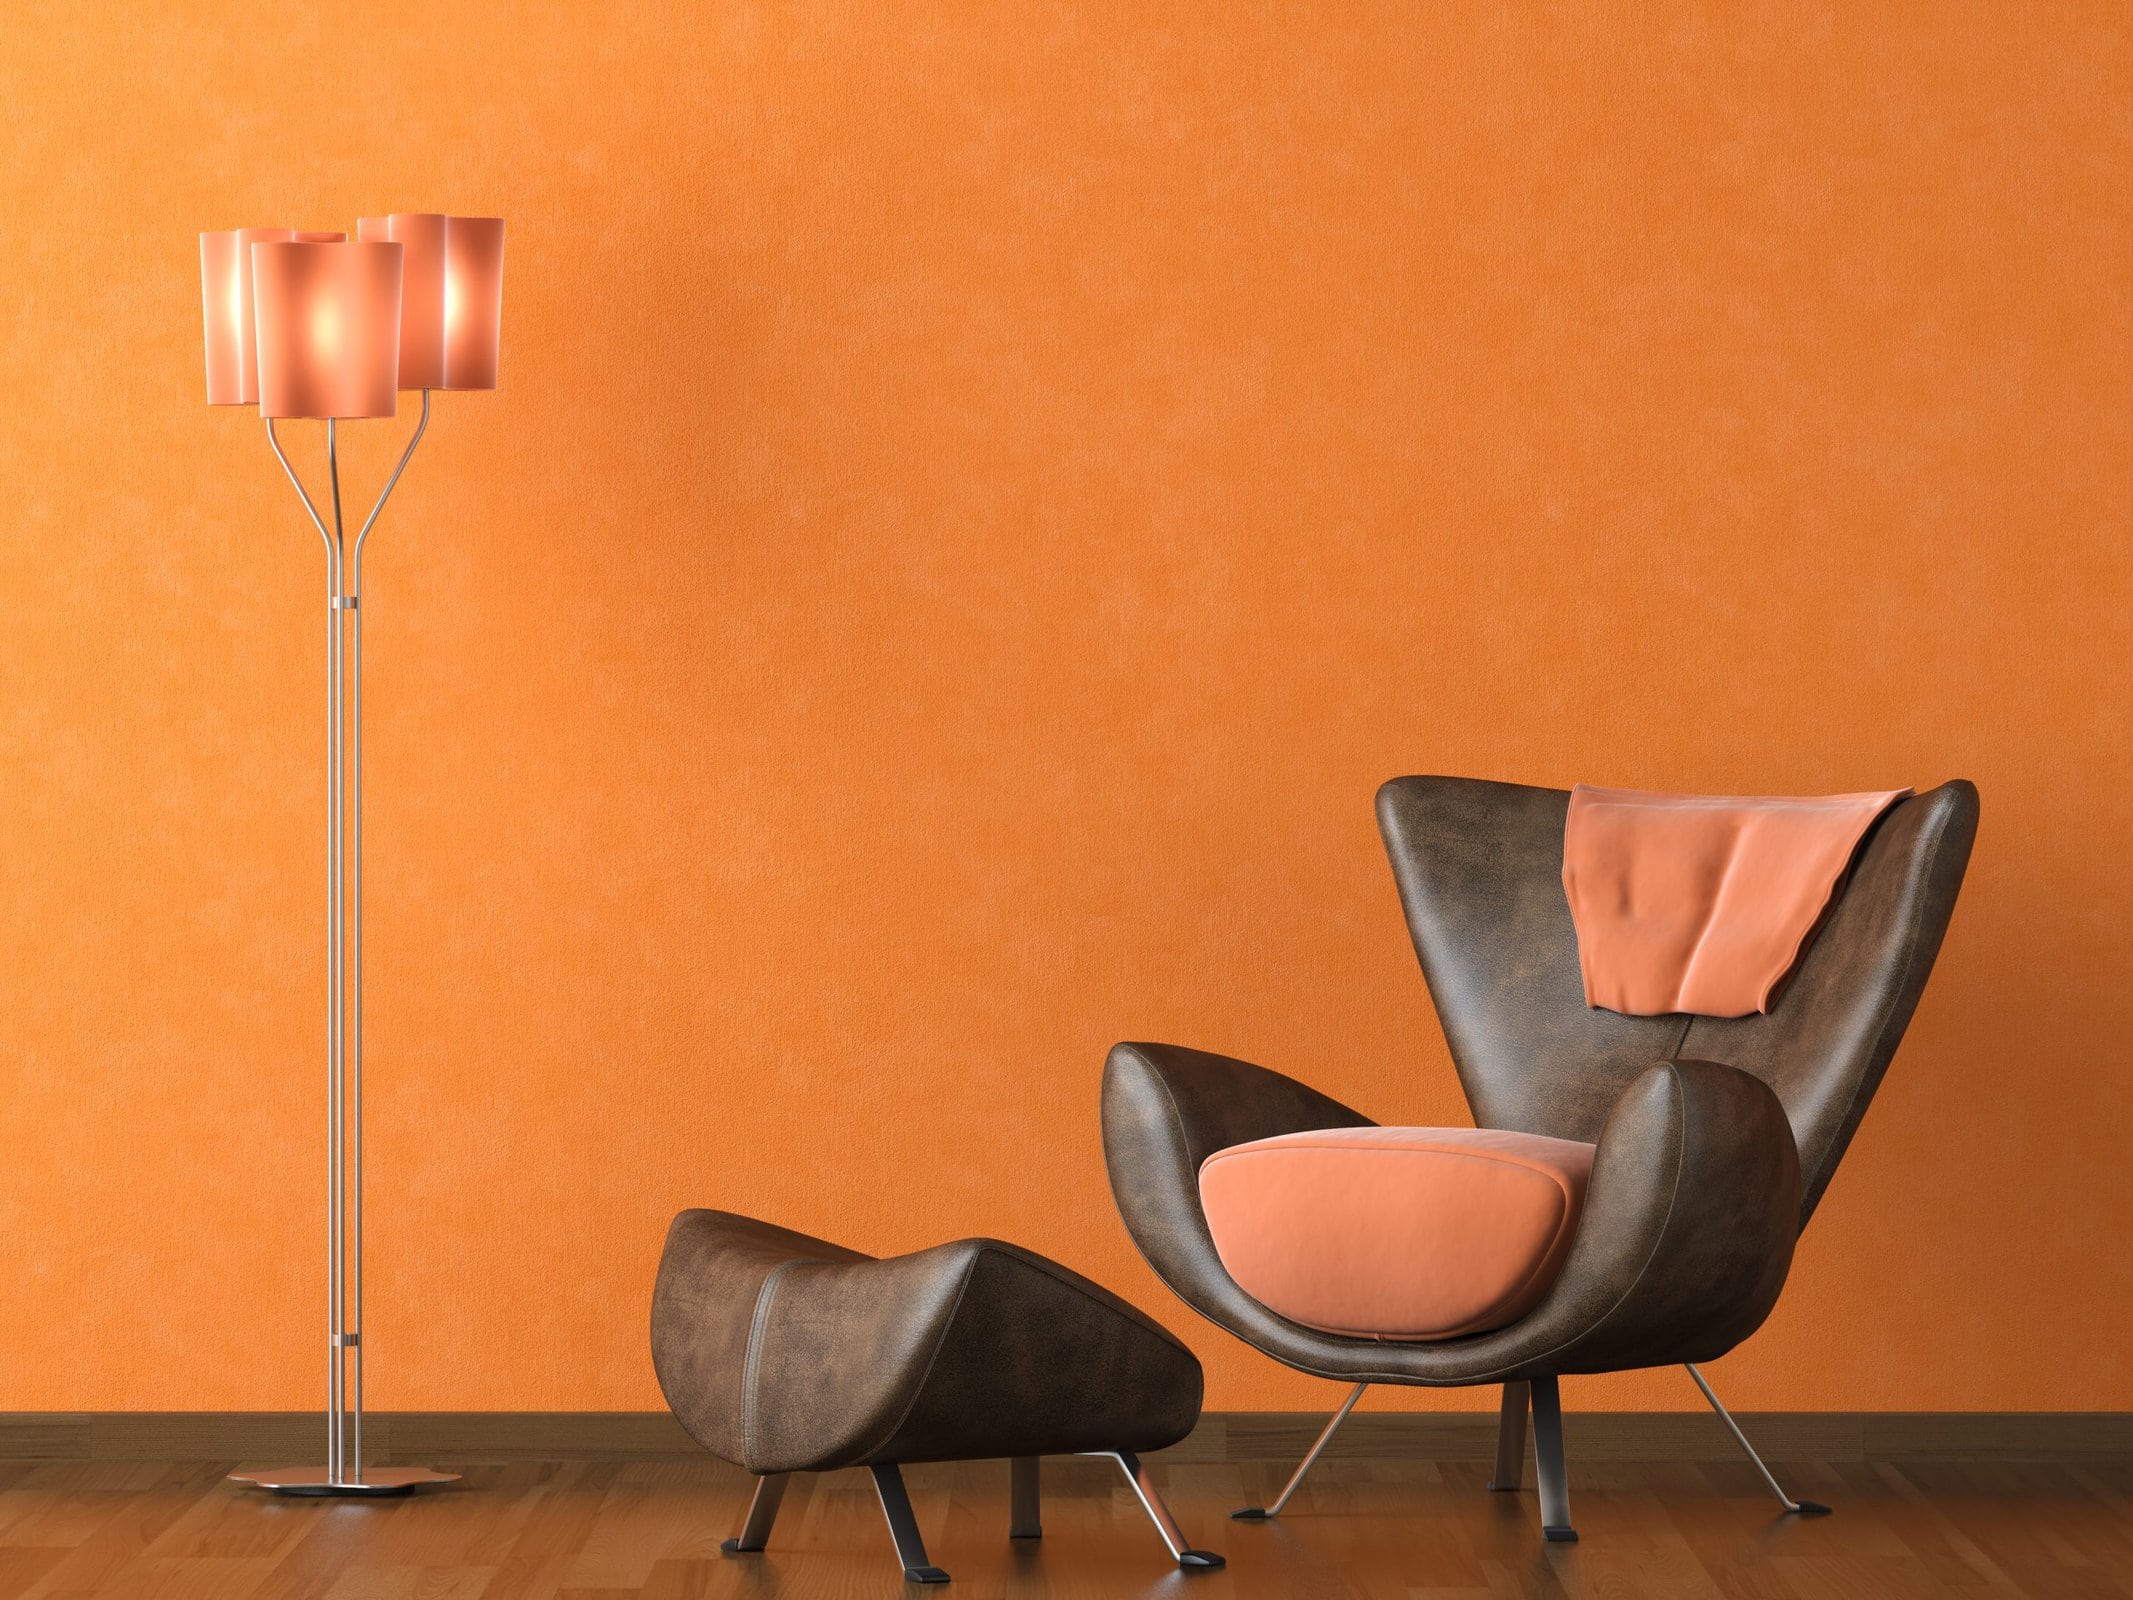  Chocolate Shades Look Lovely in Orange Rooms scaled